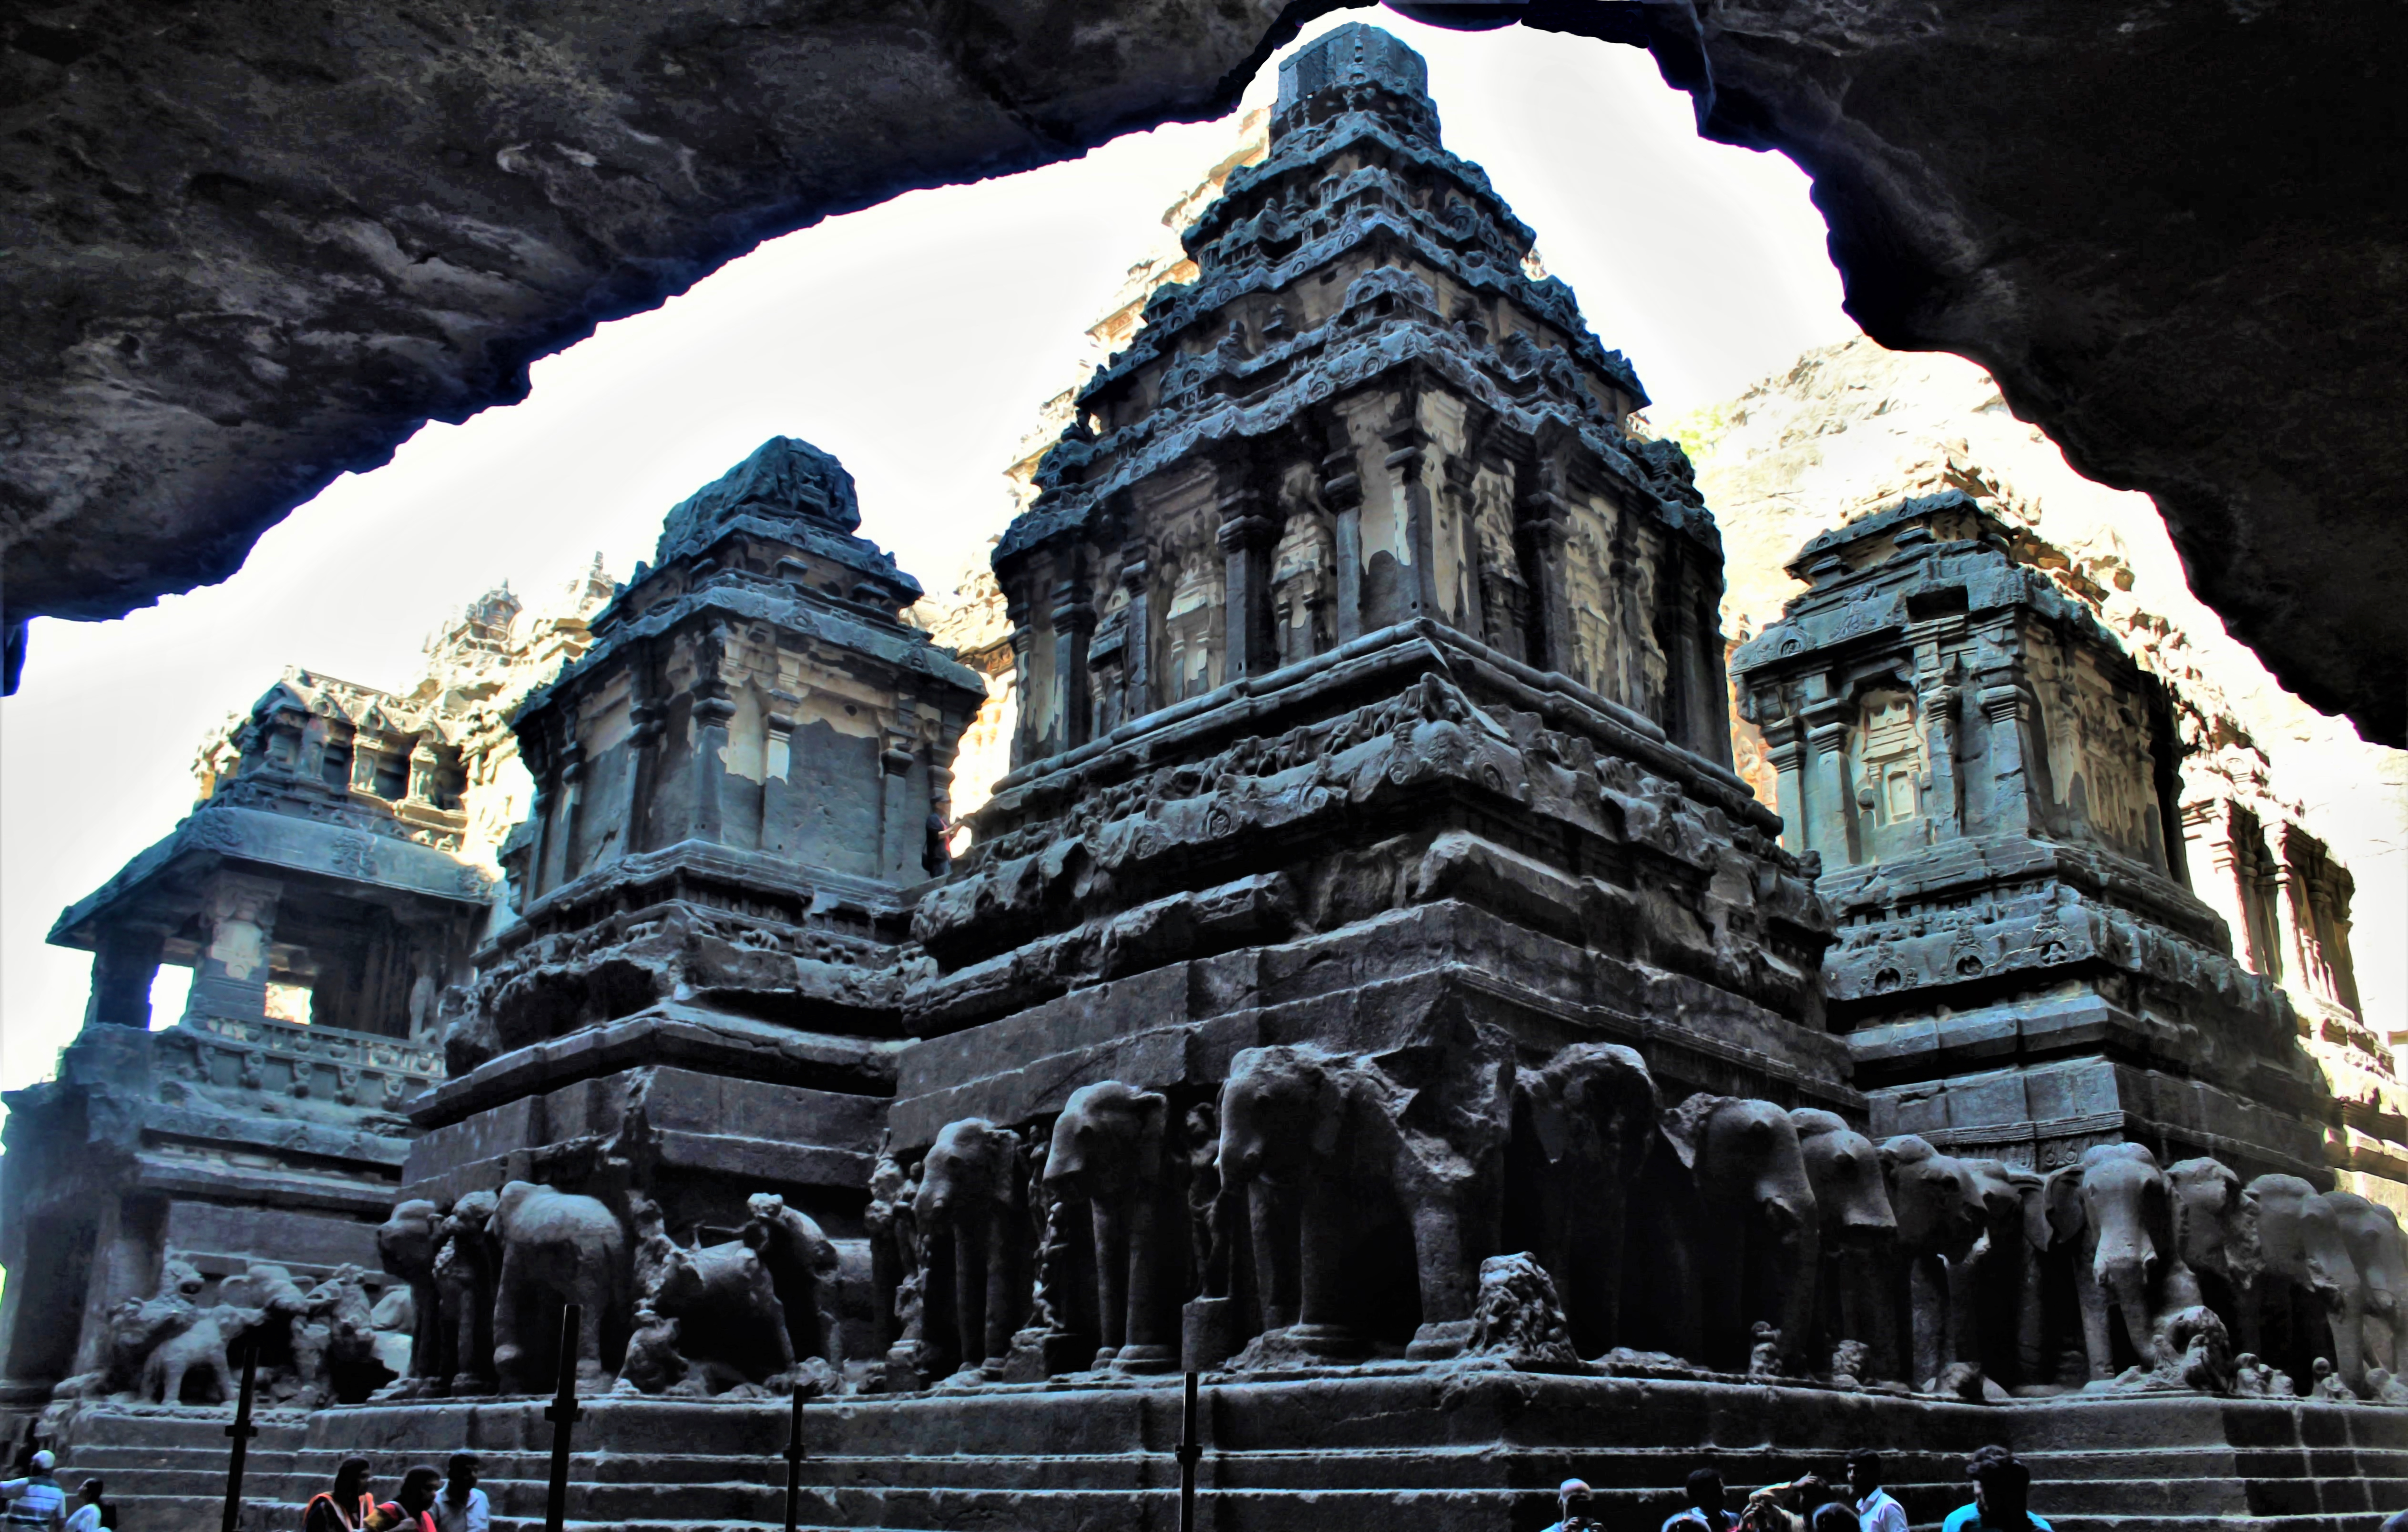 Kailasha Temple - The Centre of Attraction at Ellora